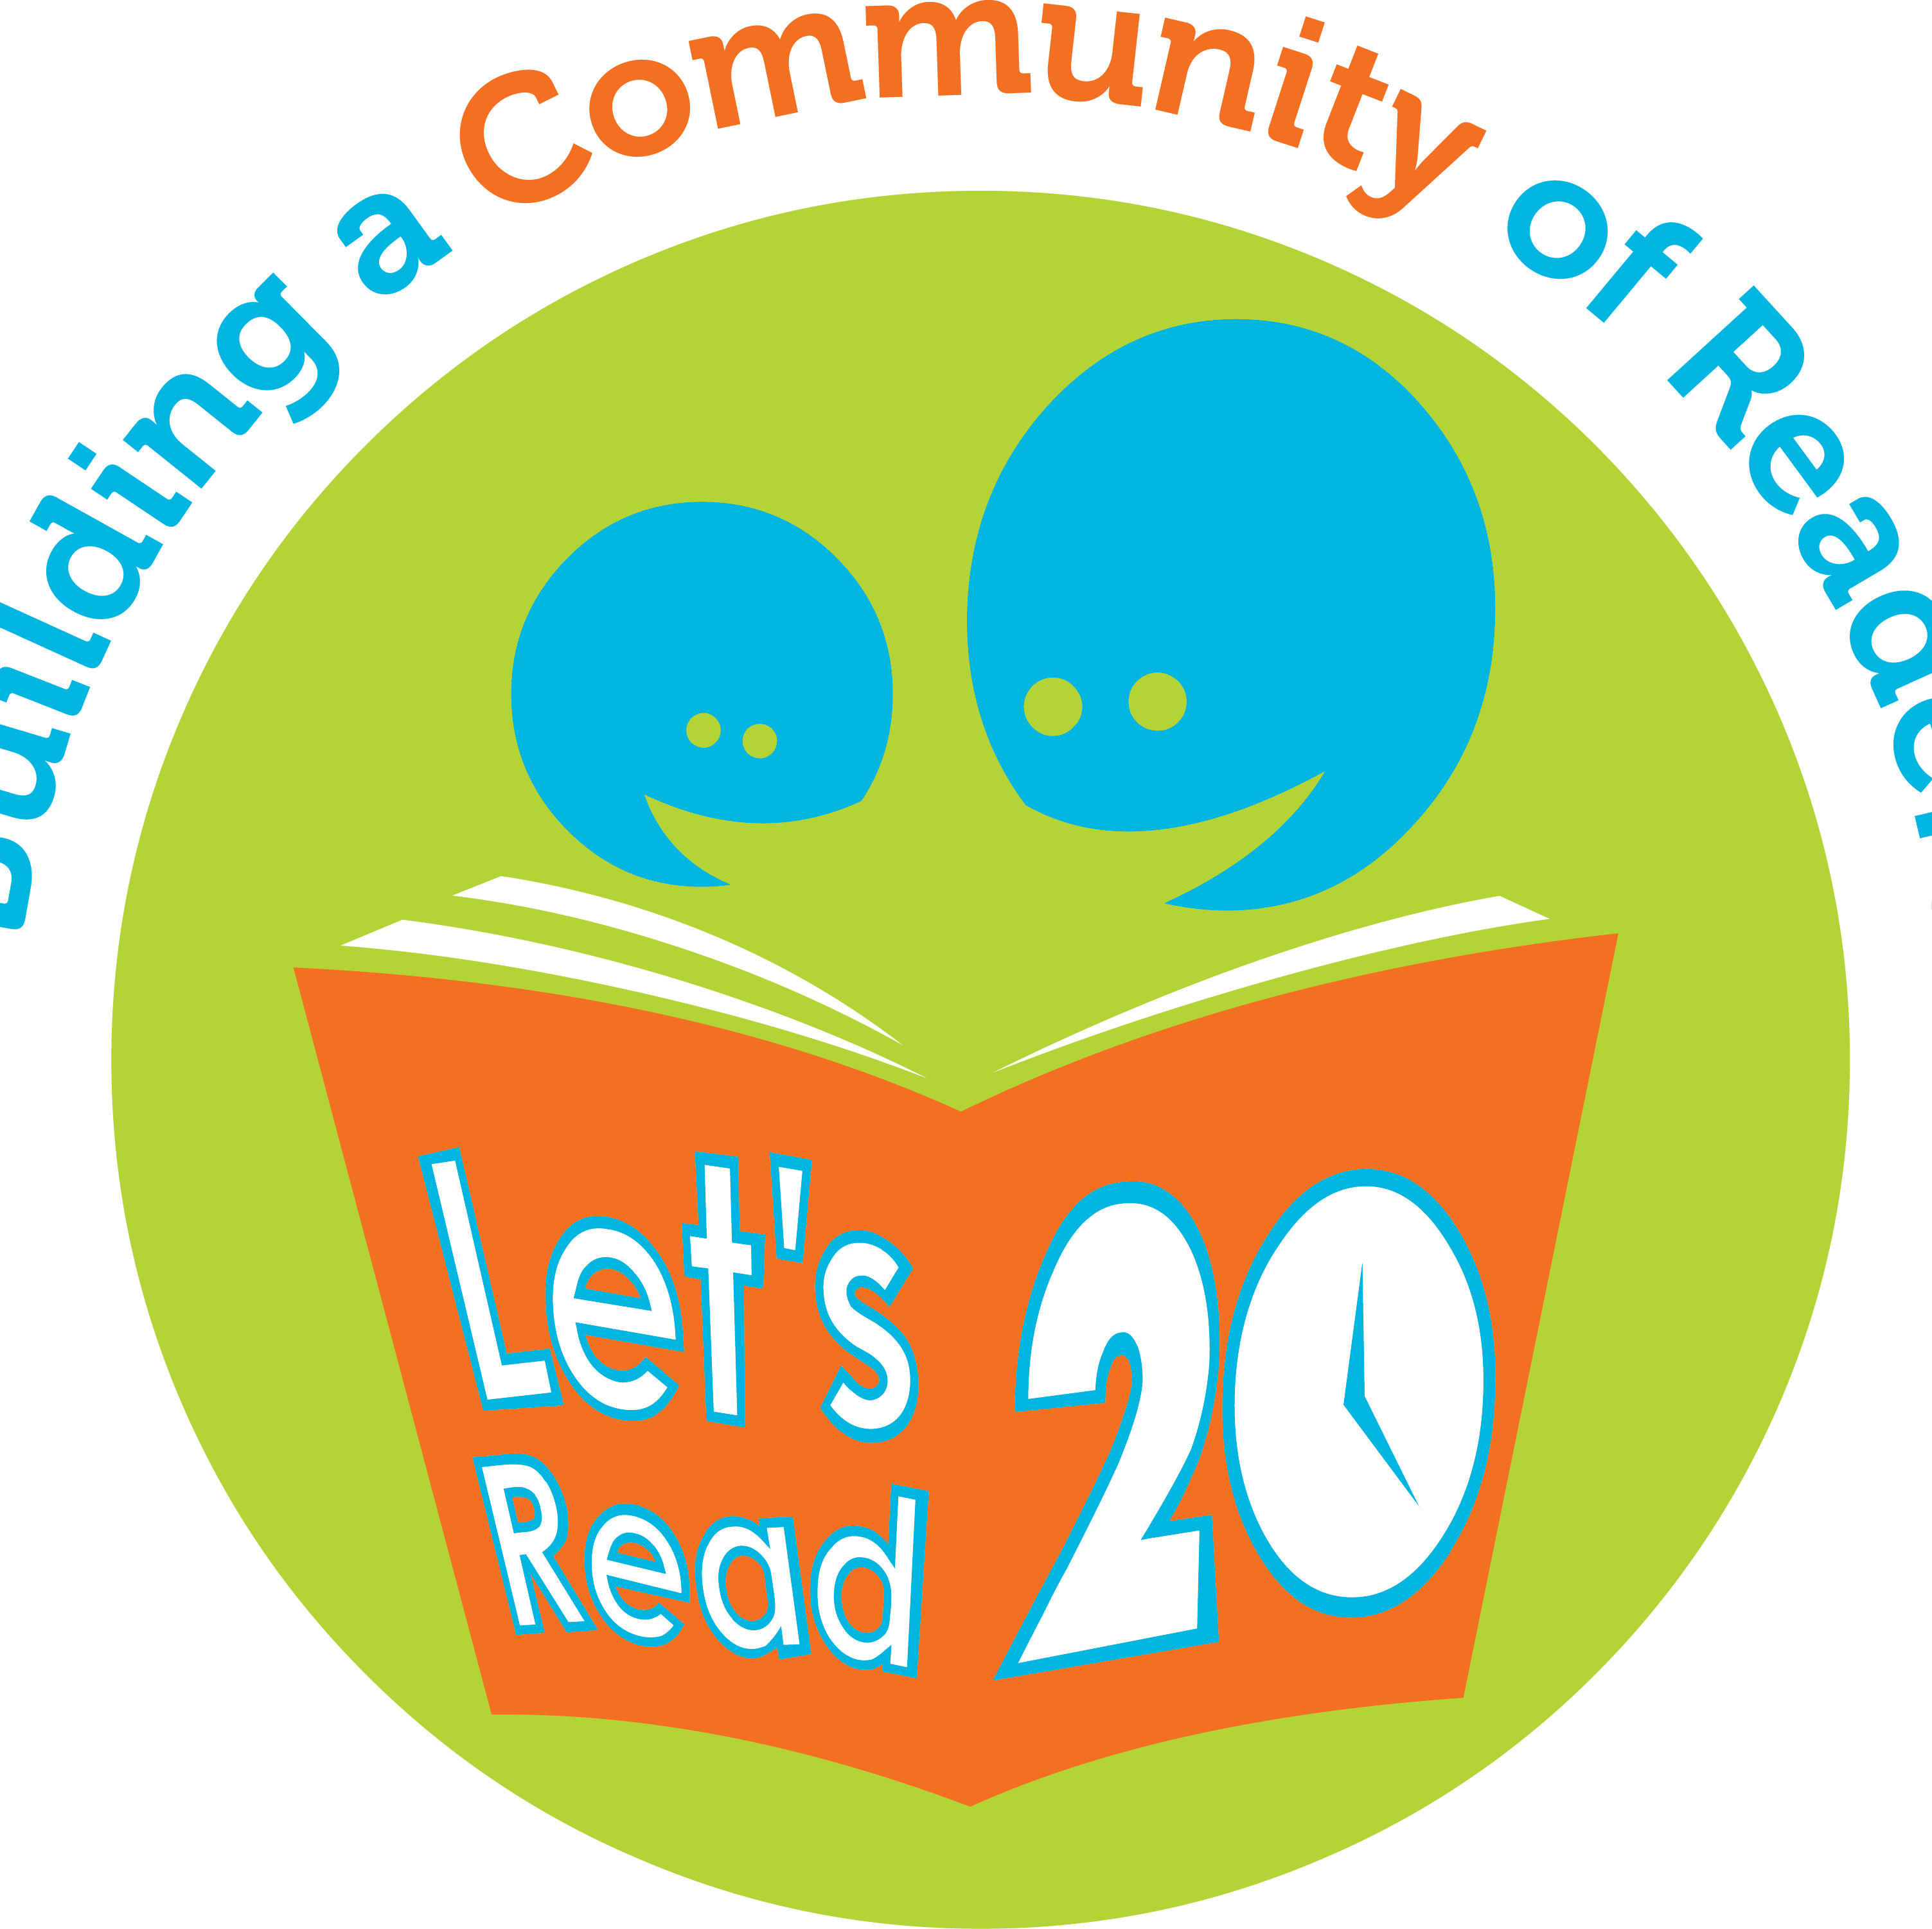 Let's Read 20 is building a community of readers by encouraging everyone to read to a child 20 minutes each and everyday!